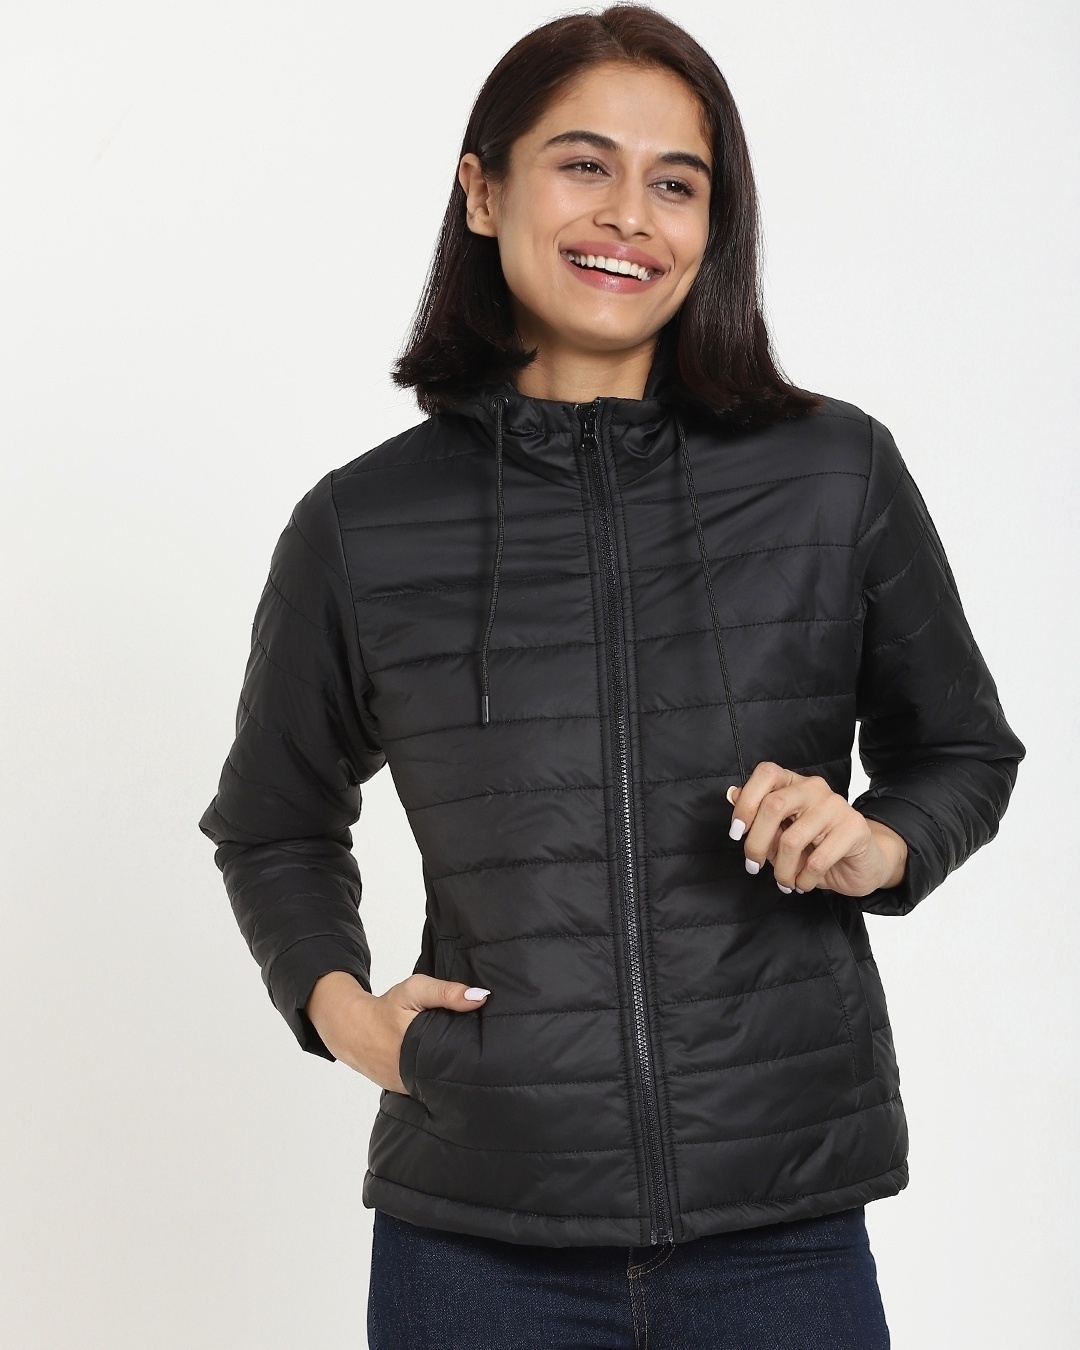 Buy Women's Black Plus Size Relaxed Fit Puffer Jacket Online at Bewakoof